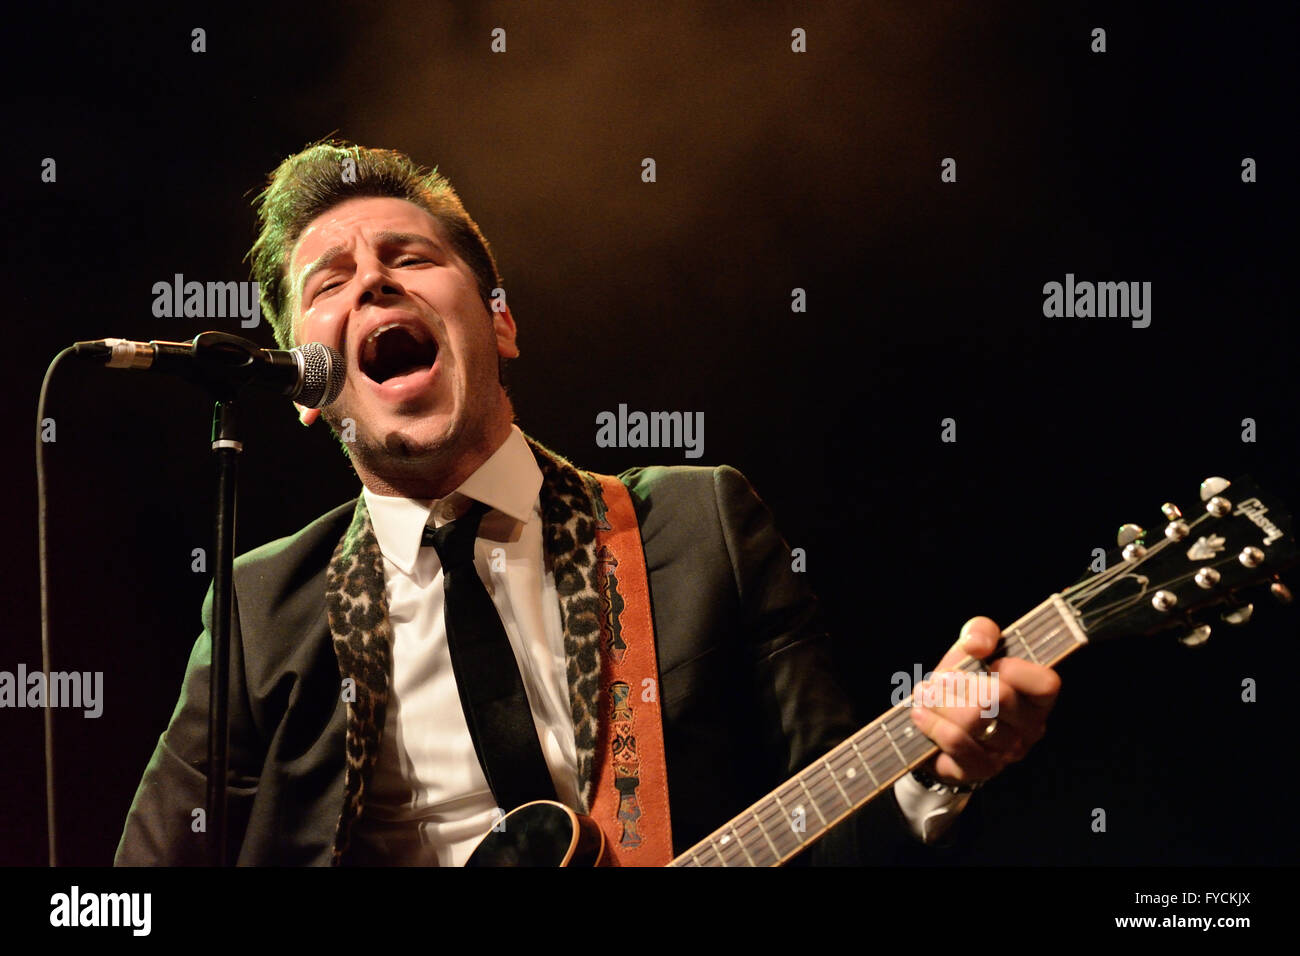 BARCELONA - MAY 15: Eli Paperboy Reed, singer and songwriter, performs at Barts stage on May 15, 2014 in Barcelona, Spain. Stock Photo